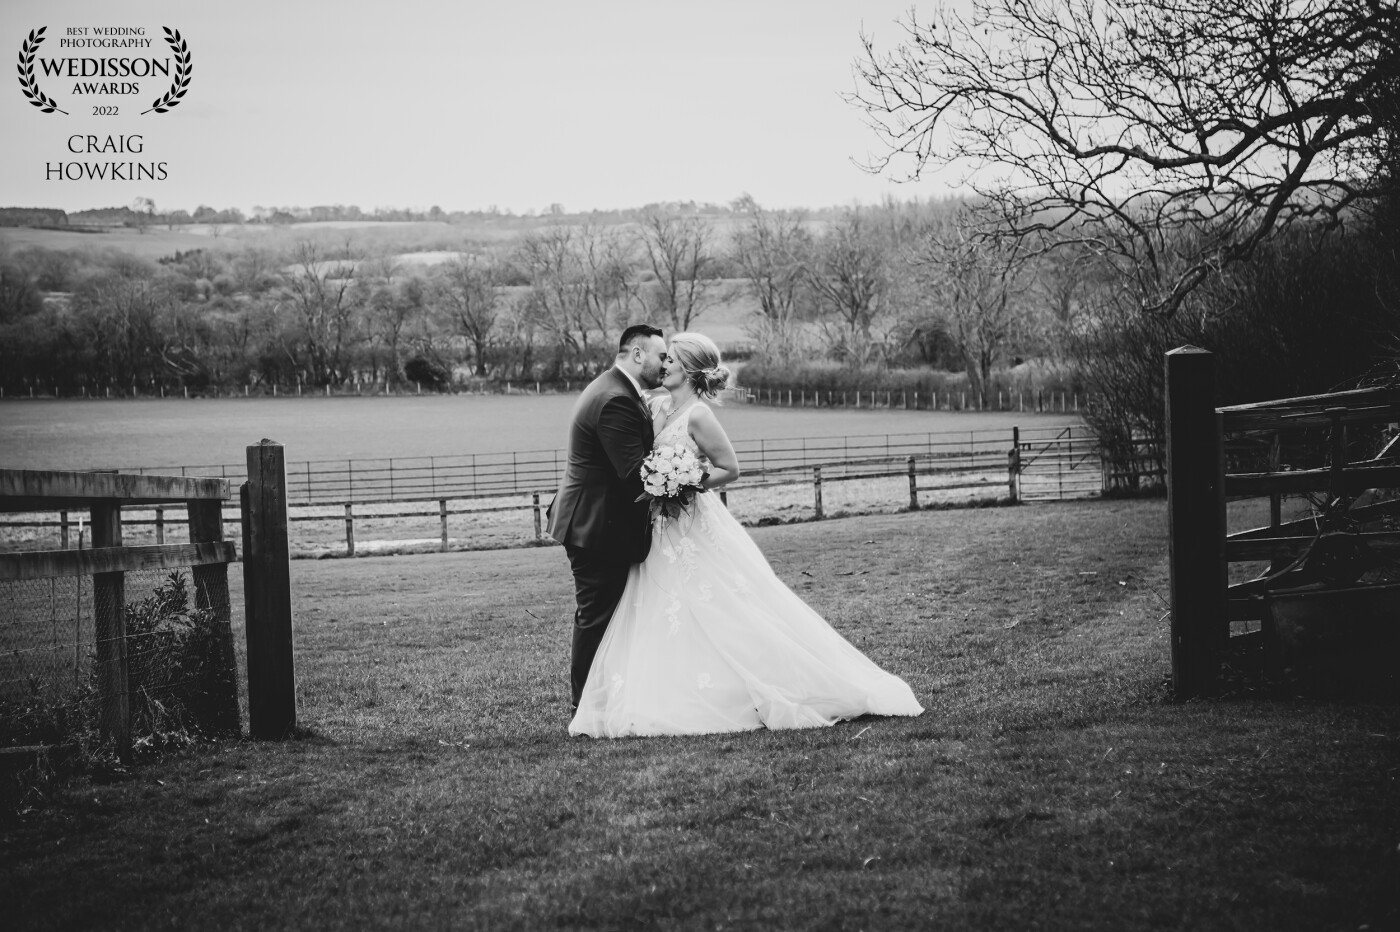 I love it when I can capture moments that are so in the moment. It's a skill to keep your eyes open and getting that timing. This was my first wedding of the season and I'm stating it with a win. The couple just had a quick kiss as we was walking back to the farm and I got this lovely image go them both.